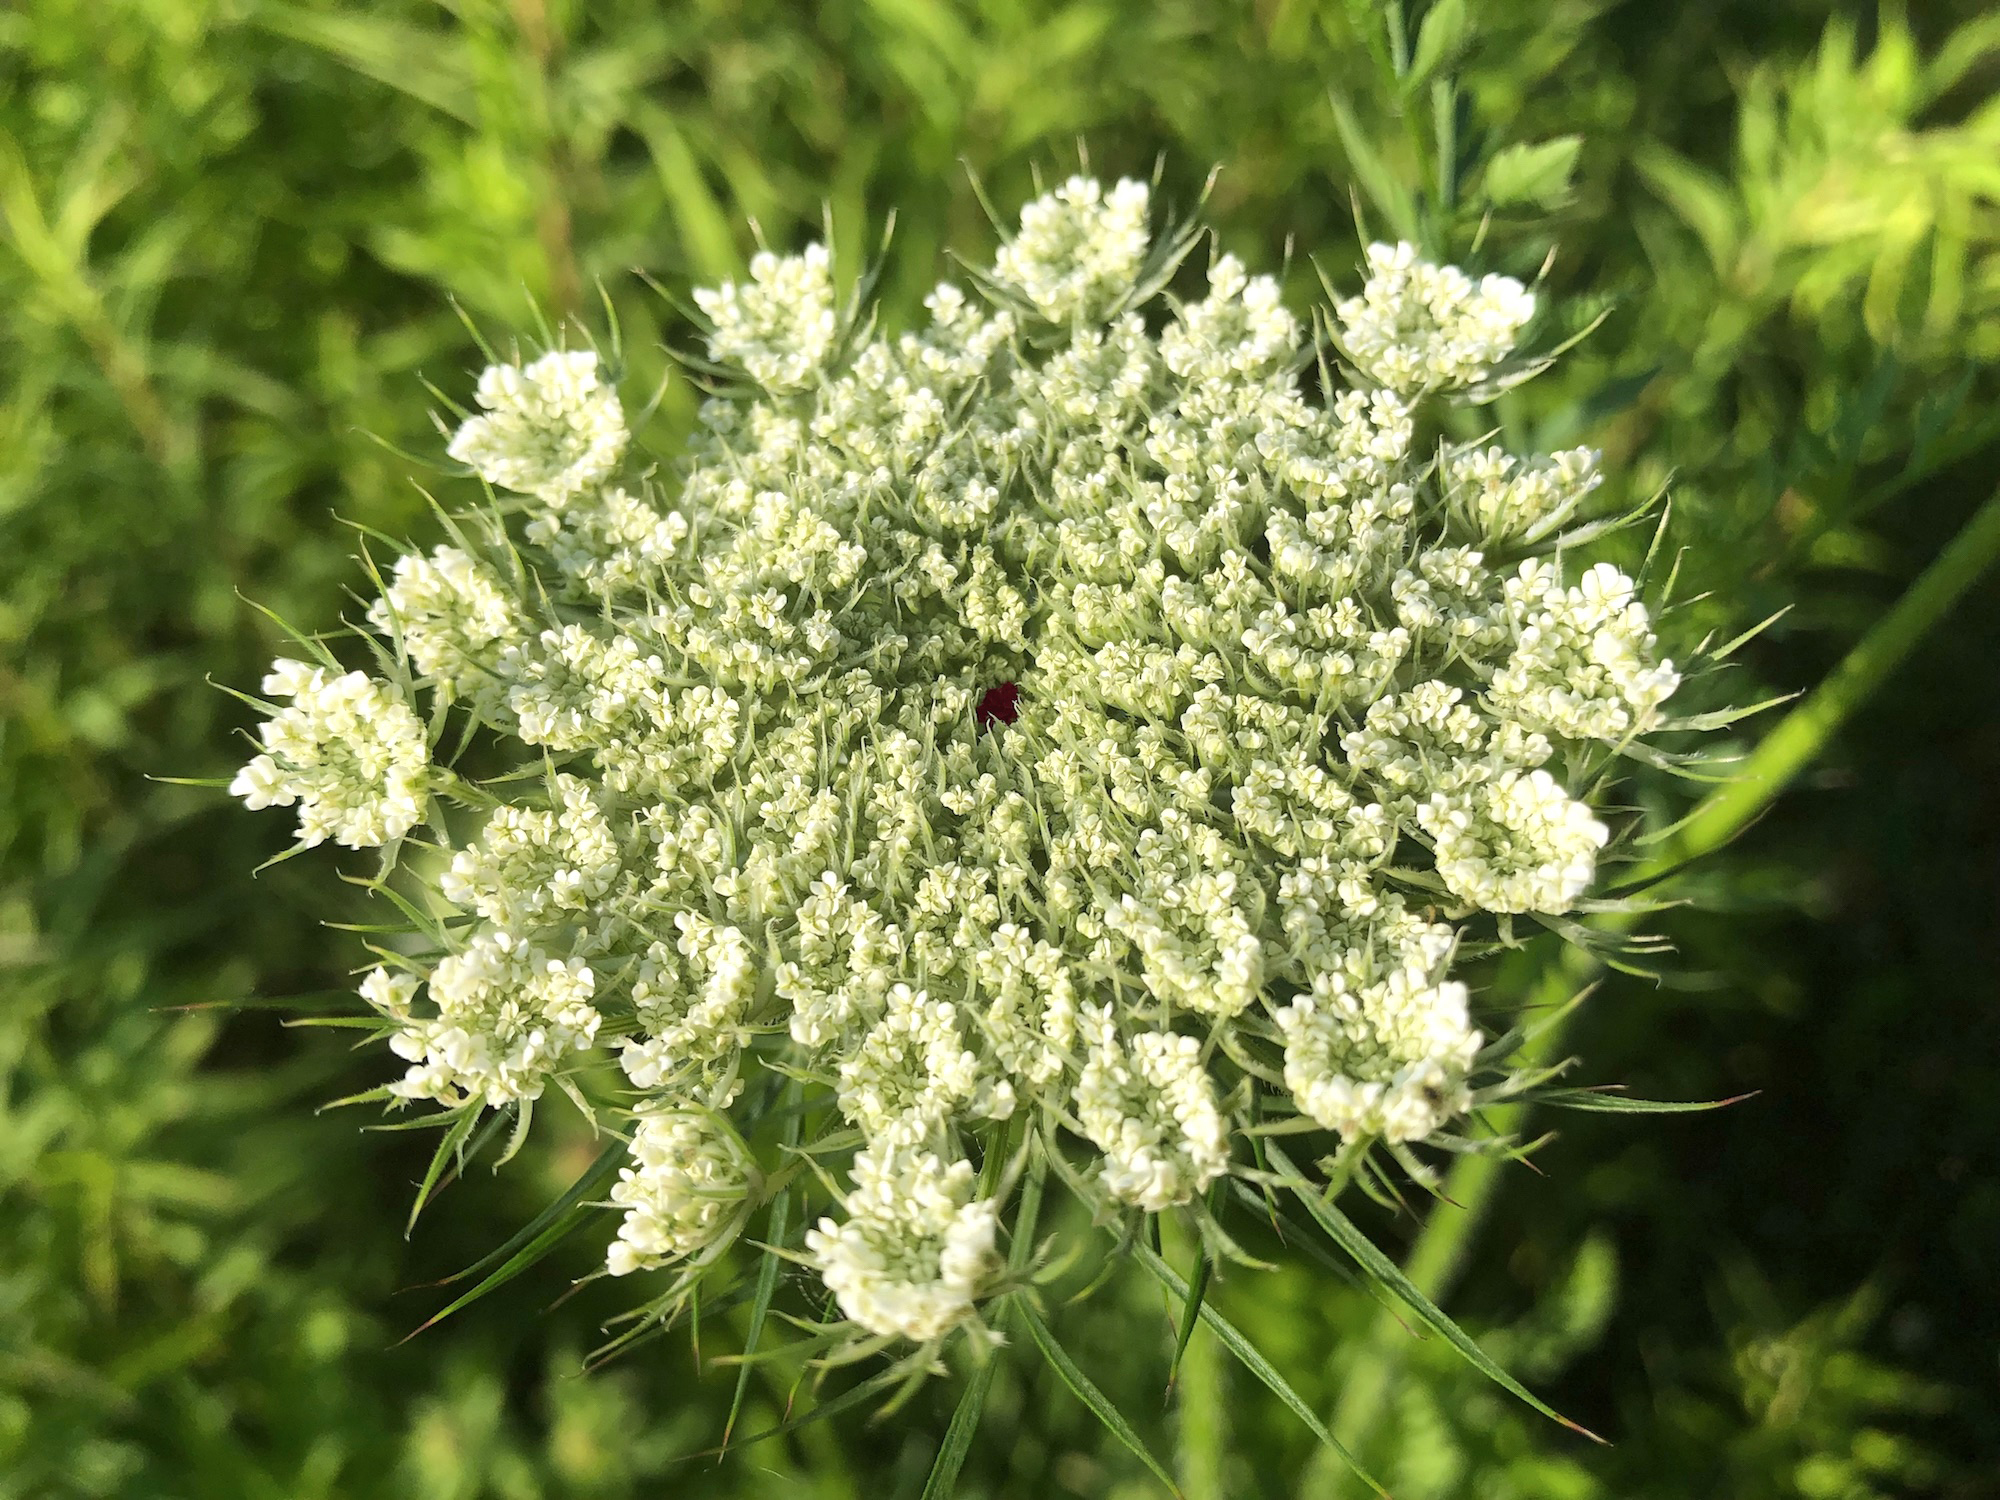 Queen Anne's Lace on bank of retaining pond on the corner of Nakoma Road and Manitou Way in Madison, WI on June 27, 2019.